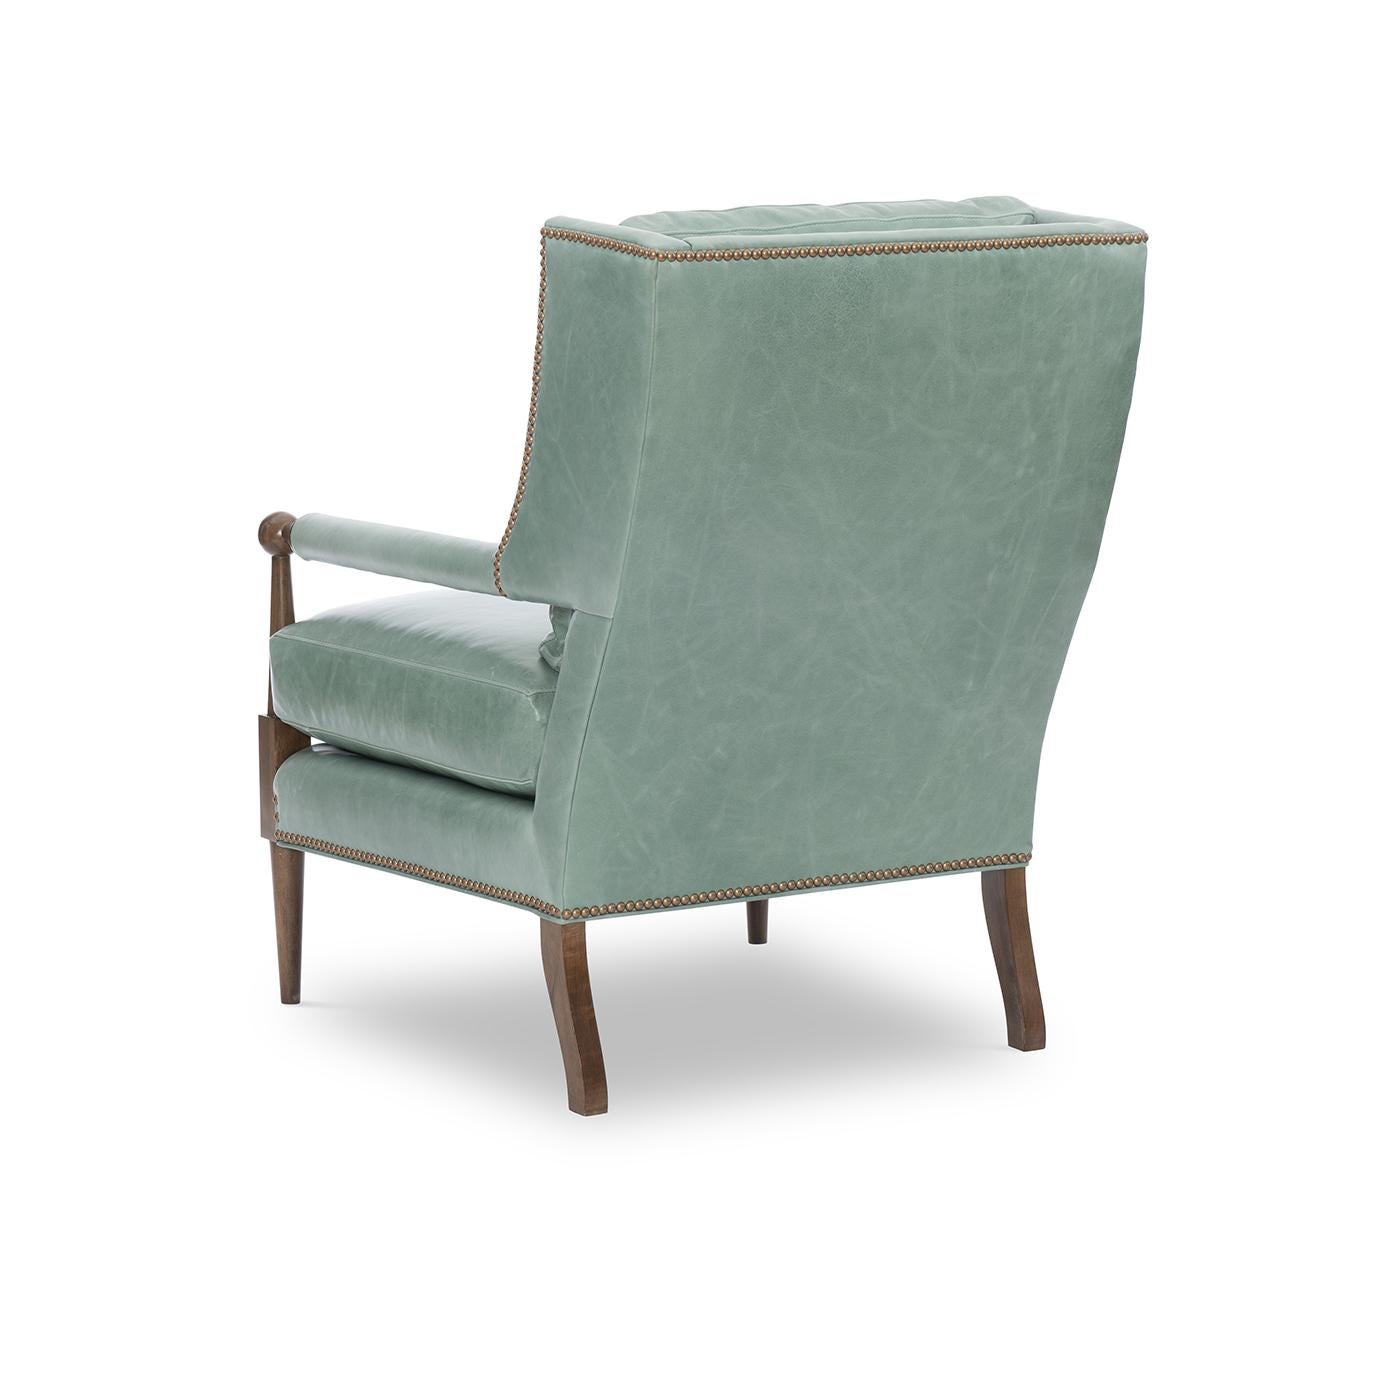 A Modern leather upholstered armchair with a combination of classic and modern elements. A loose back pillow and a comfort down seat cushion.

Shown in Mont Blanc Rainforest leather with brass nailhead trim. 

Completely Made in USA, with